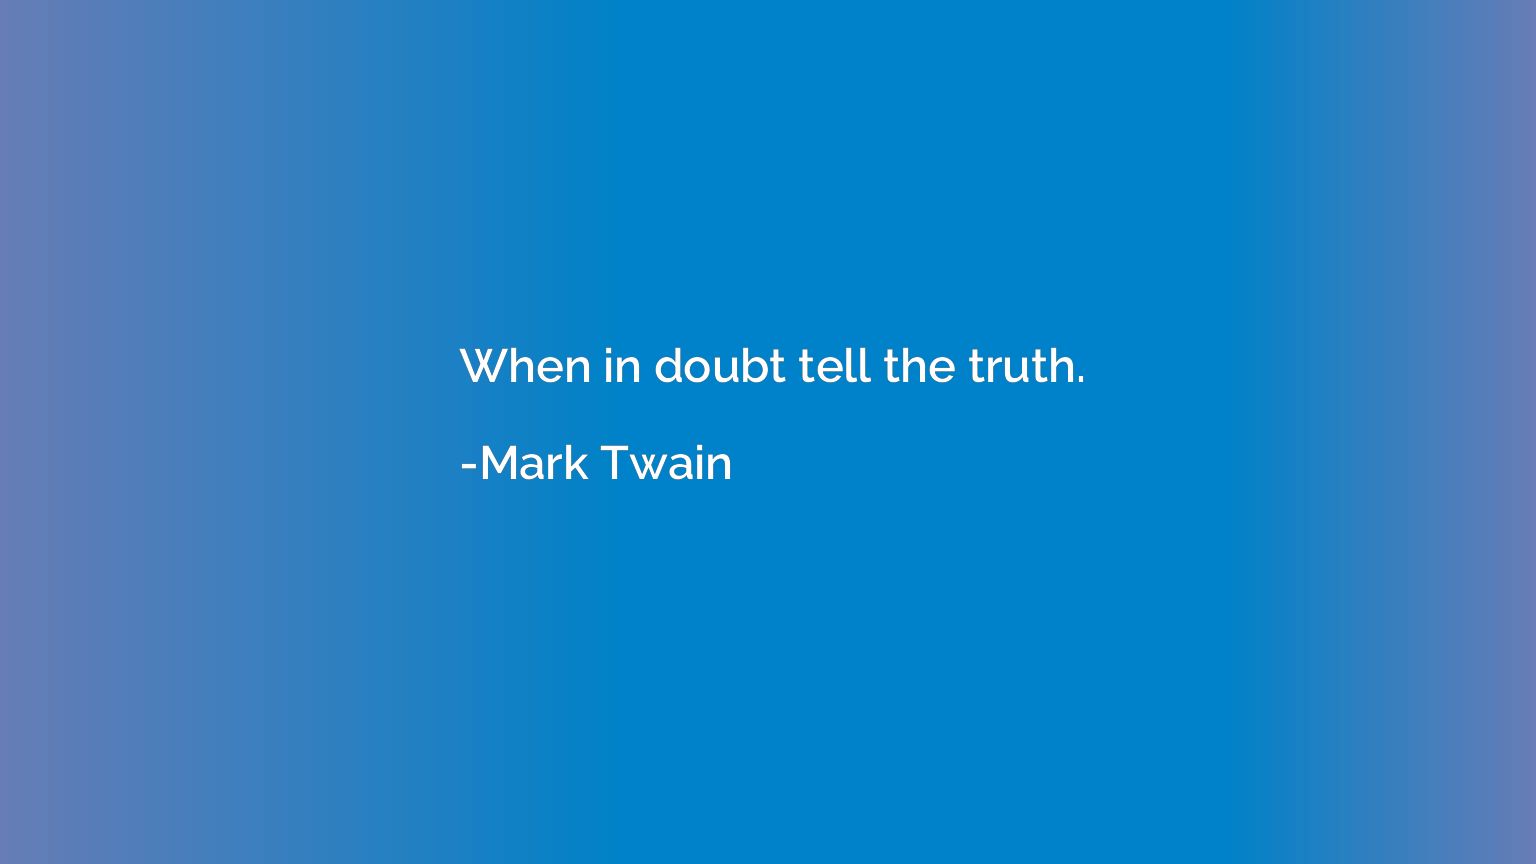 When in doubt tell the truth.